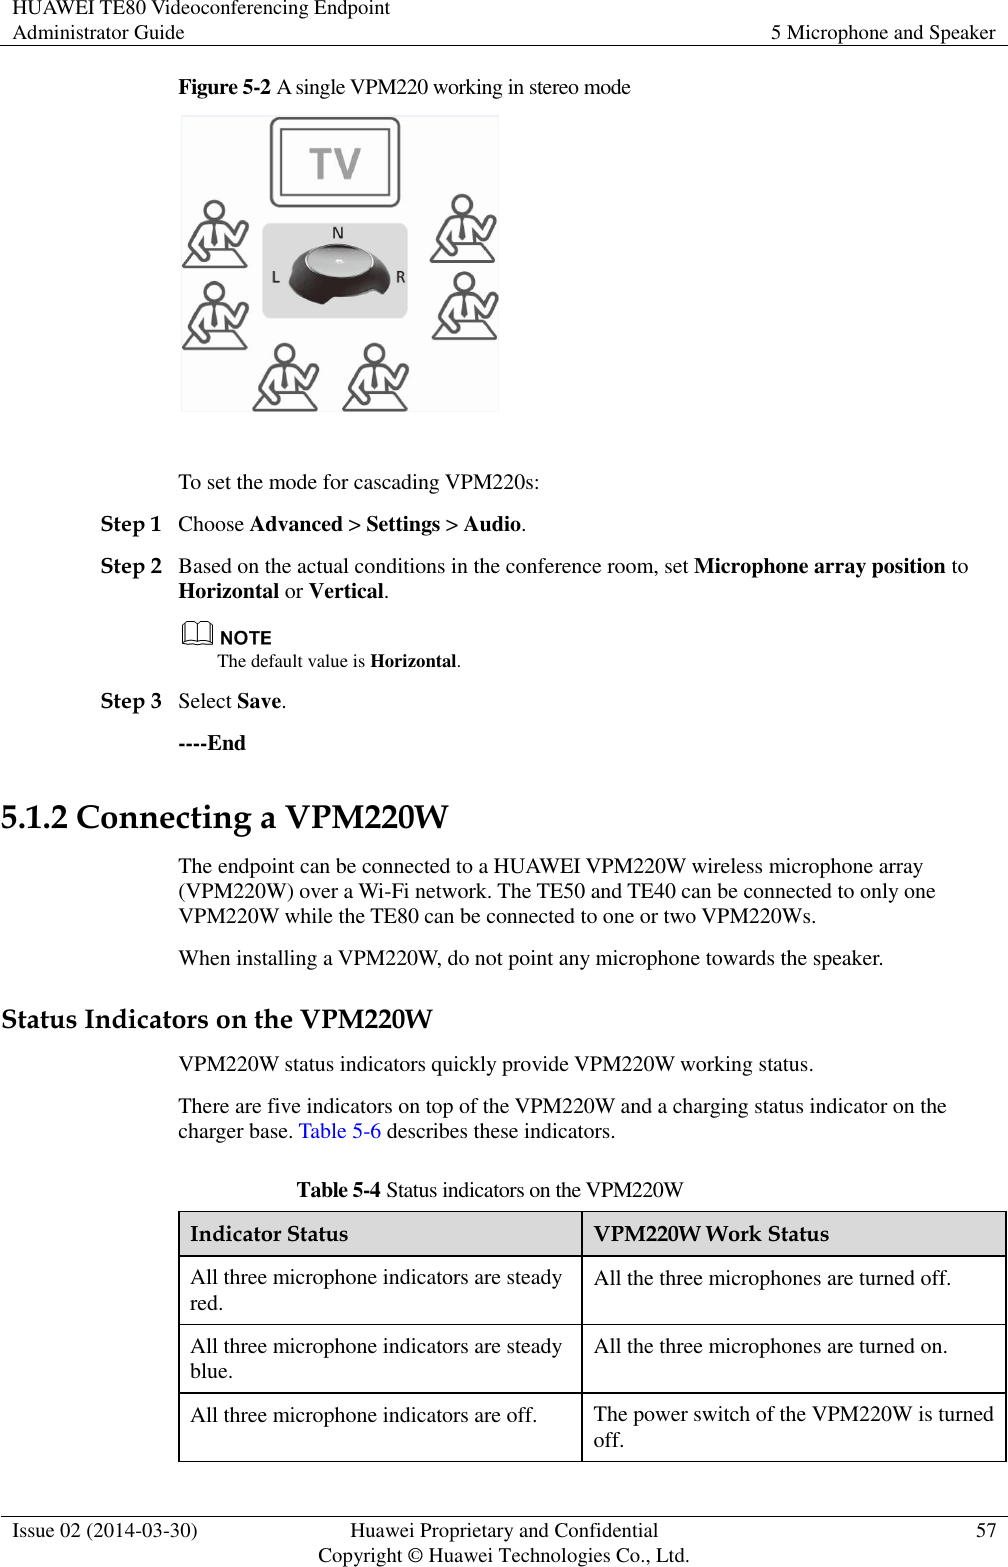 HUAWEI TE80 Videoconferencing Endpoint Administrator Guide 5 Microphone and Speaker  Issue 02 (2014-03-30) Huawei Proprietary and Confidential Copyright © Huawei Technologies Co., Ltd. 57  Figure 5-2 A single VPM220 working in stereo mode   To set the mode for cascading VPM220s: Step 1 Choose Advanced &gt; Settings &gt; Audio.   Step 2 Based on the actual conditions in the conference room, set Microphone array position to Horizontal or Vertical.  The default value is Horizontal. Step 3 Select Save. ----End 5.1.2 Connecting a VPM220W The endpoint can be connected to a HUAWEI VPM220W wireless microphone array (VPM220W) over a Wi-Fi network. The TE50 and TE40 can be connected to only one VPM220W while the TE80 can be connected to one or two VPM220Ws. When installing a VPM220W, do not point any microphone towards the speaker. Status Indicators on the VPM220W VPM220W status indicators quickly provide VPM220W working status. There are five indicators on top of the VPM220W and a charging status indicator on the charger base. Table 5-6 describes these indicators. Table 5-4 Status indicators on the VPM220W Indicator Status VPM220W Work Status All three microphone indicators are steady red. All the three microphones are turned off. All three microphone indicators are steady blue. All the three microphones are turned on. All three microphone indicators are off. The power switch of the VPM220W is turned off. 